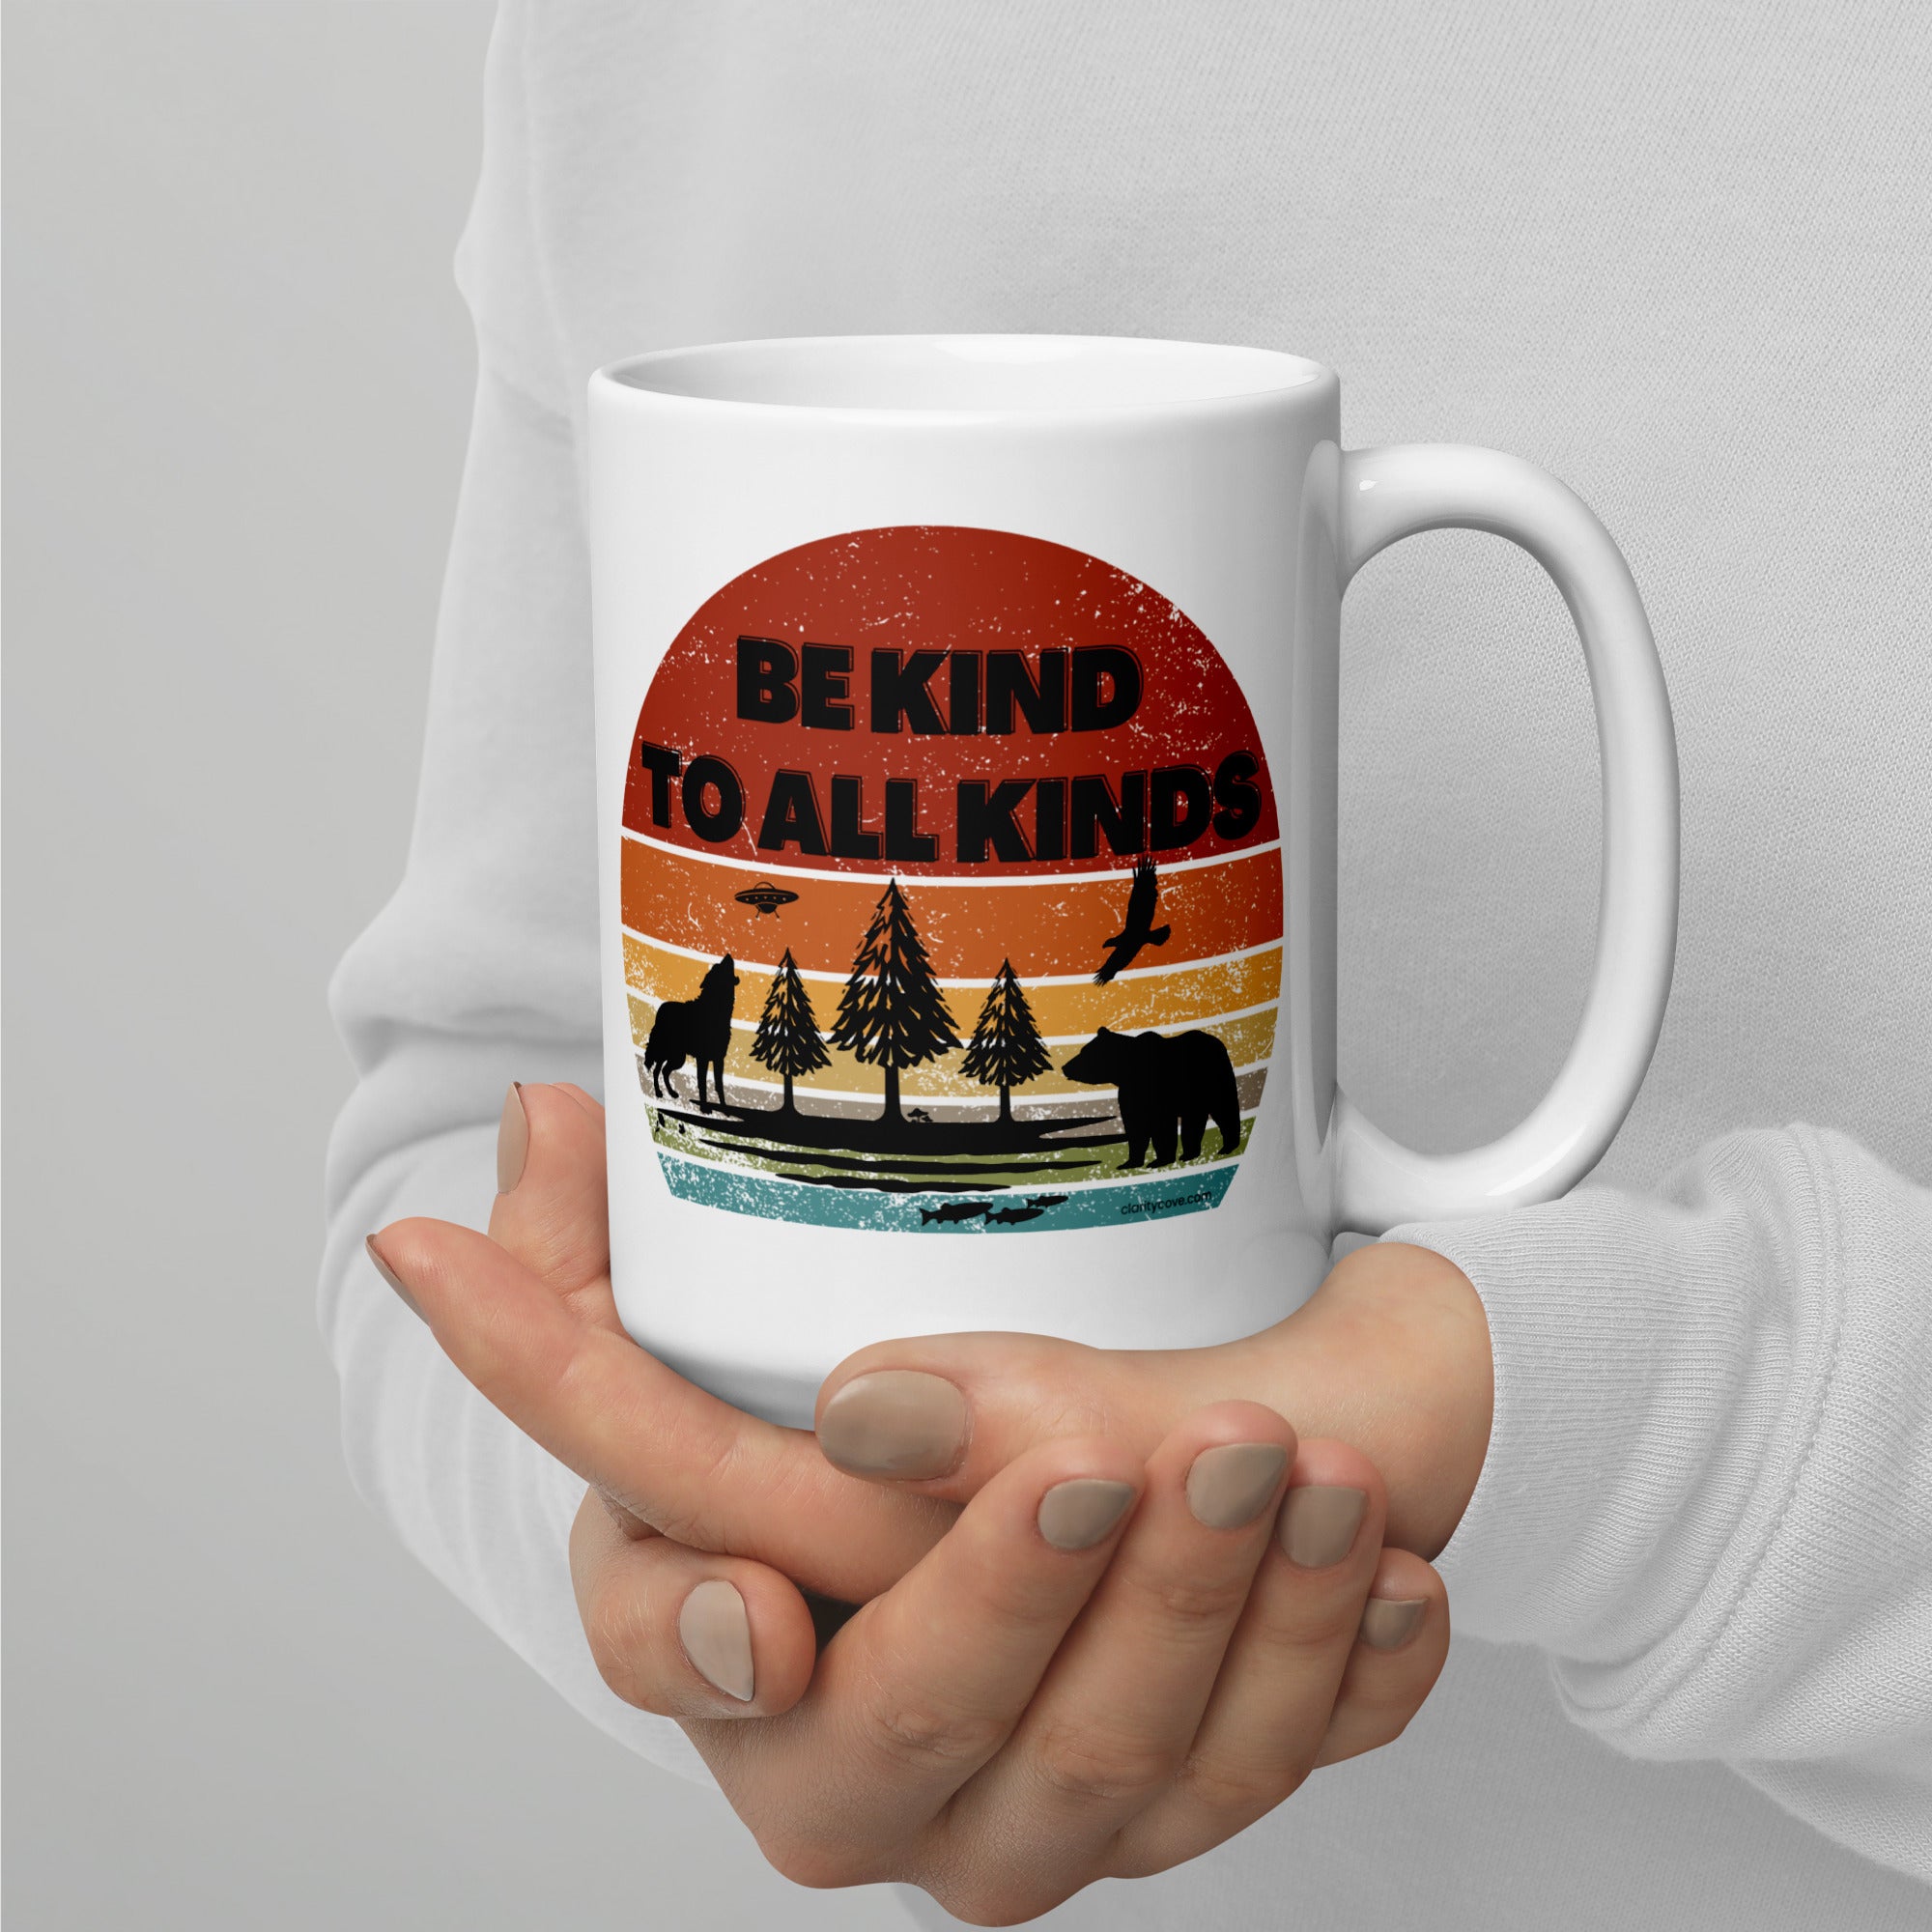 be kind to all kinds white ceramic 15oz coffee mug by clarity cove